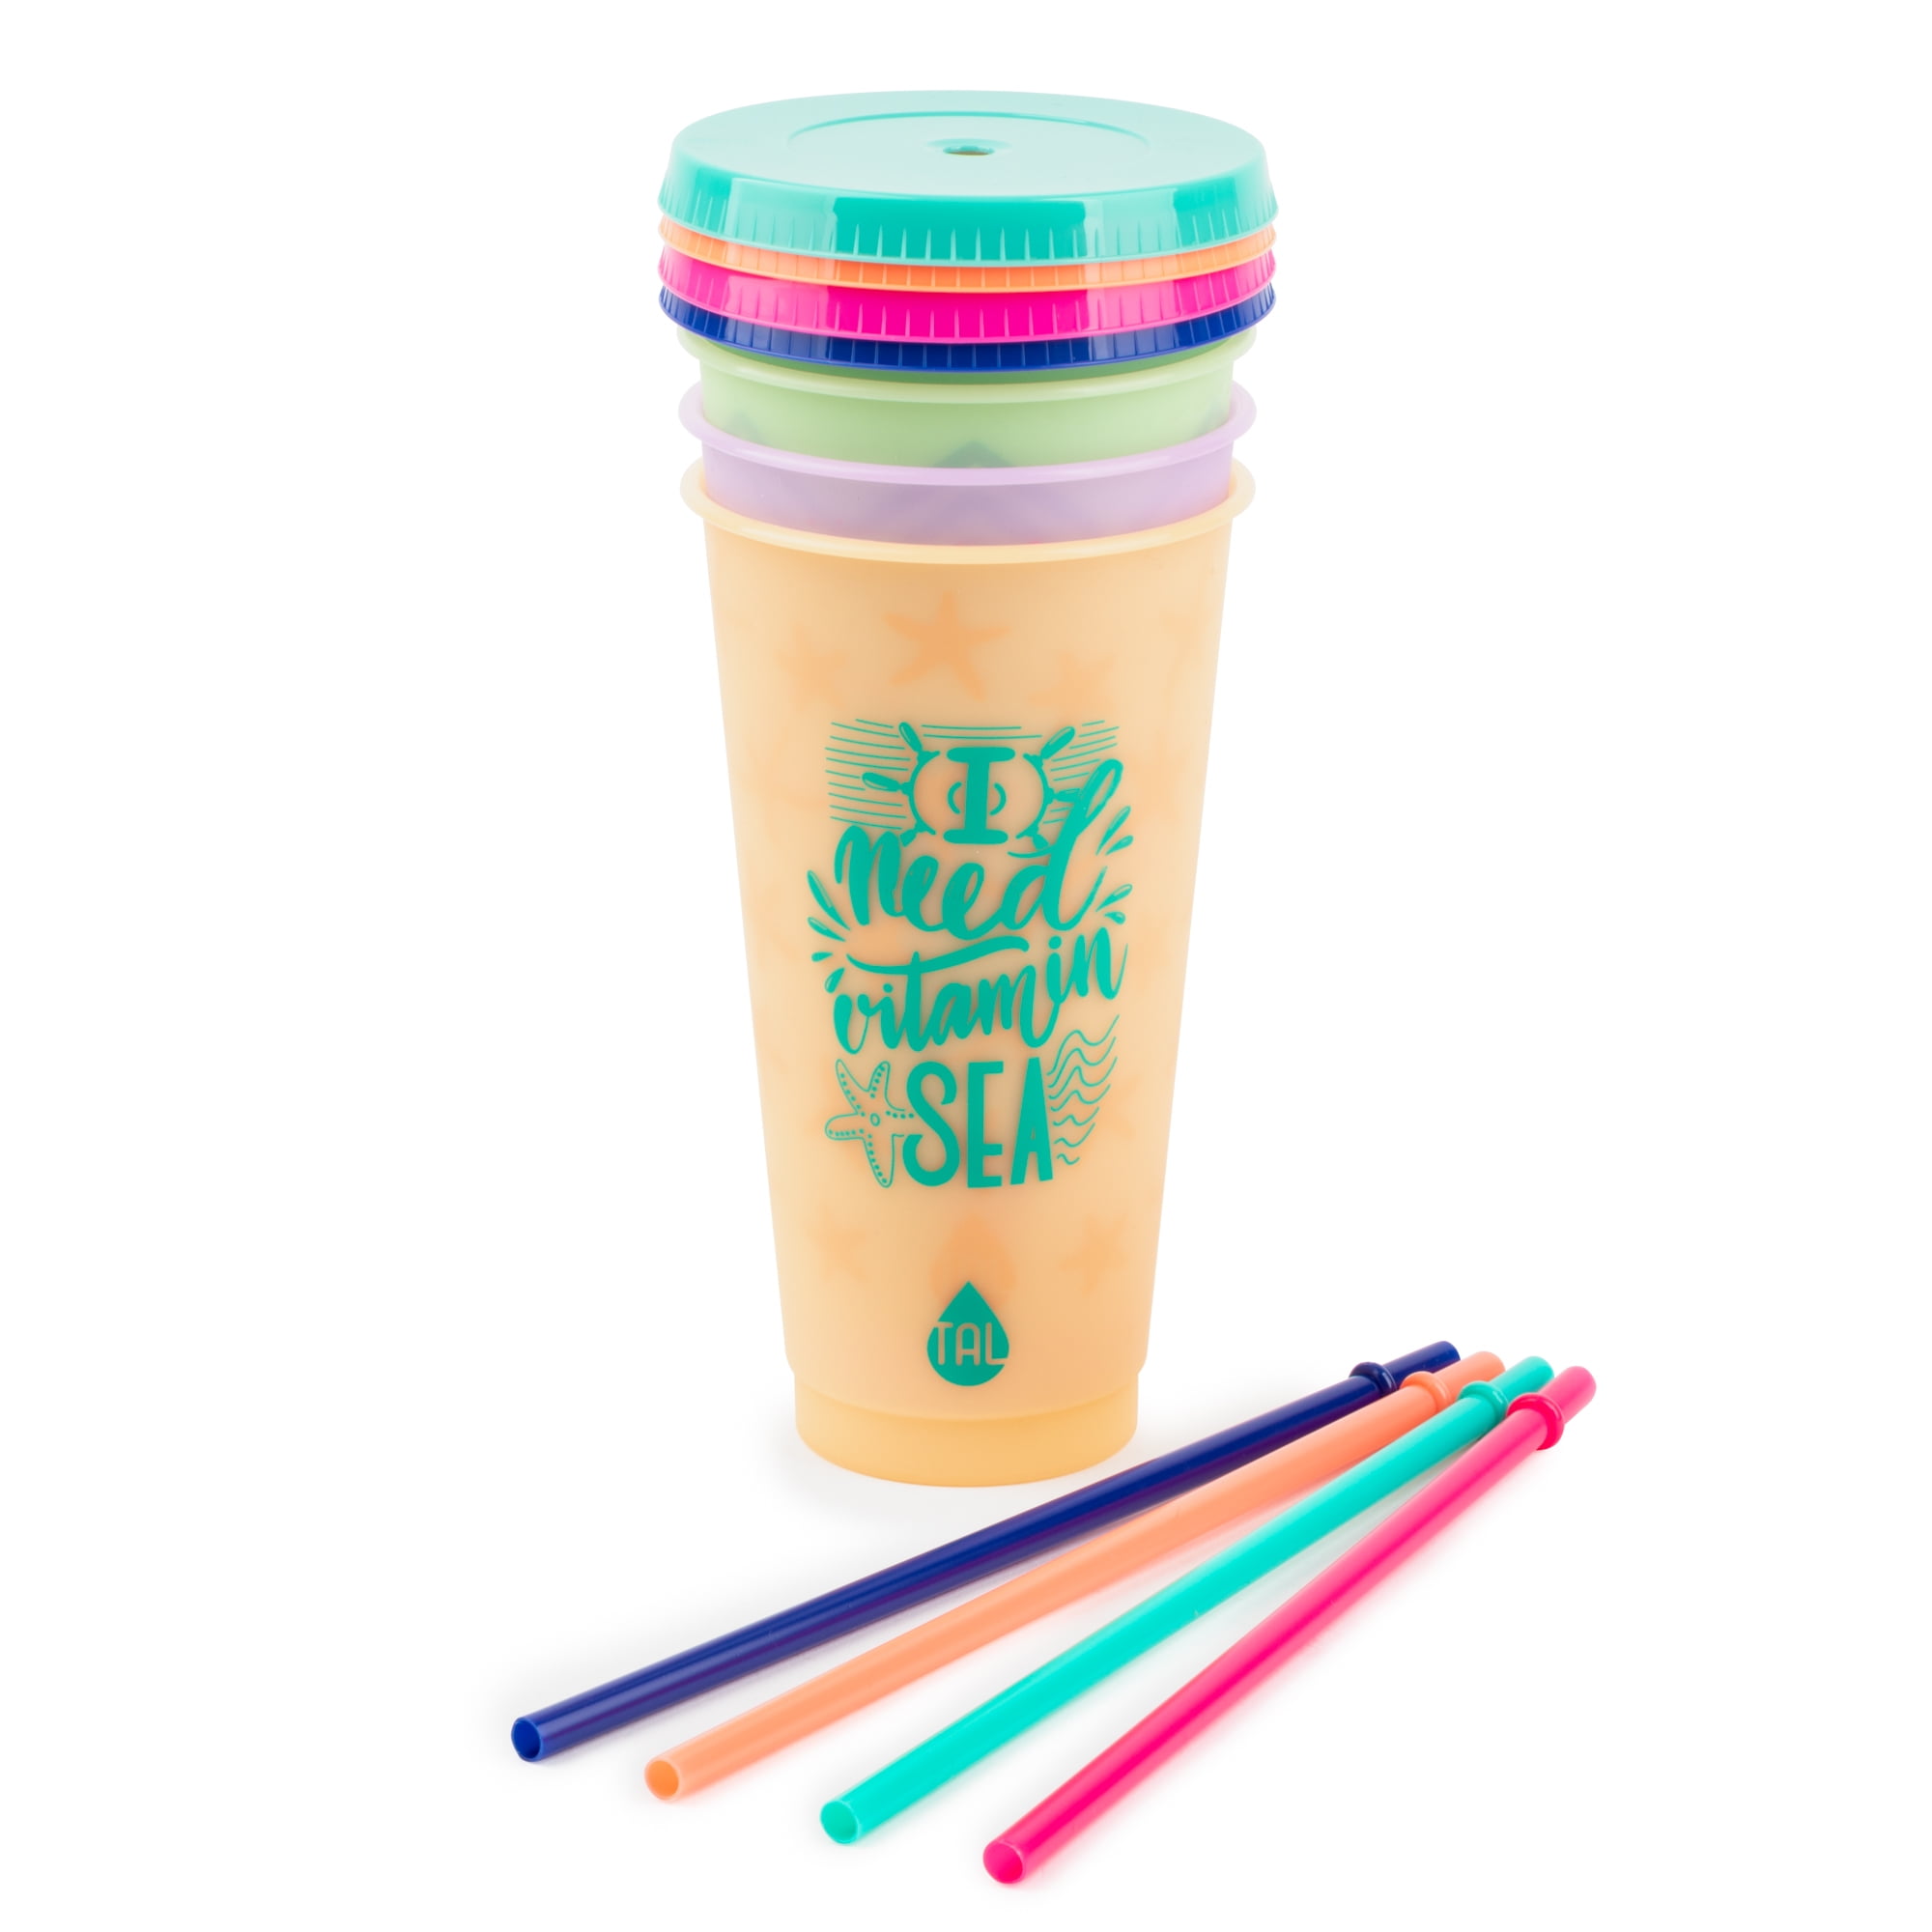  TAL Color Changing Tumbler & Straw Set. 24 oz.- 4 Reusable Cups,  Lids and Straws - Summer Coffee Tumblers - Summer Cups, Set of 4: Home &  Kitchen